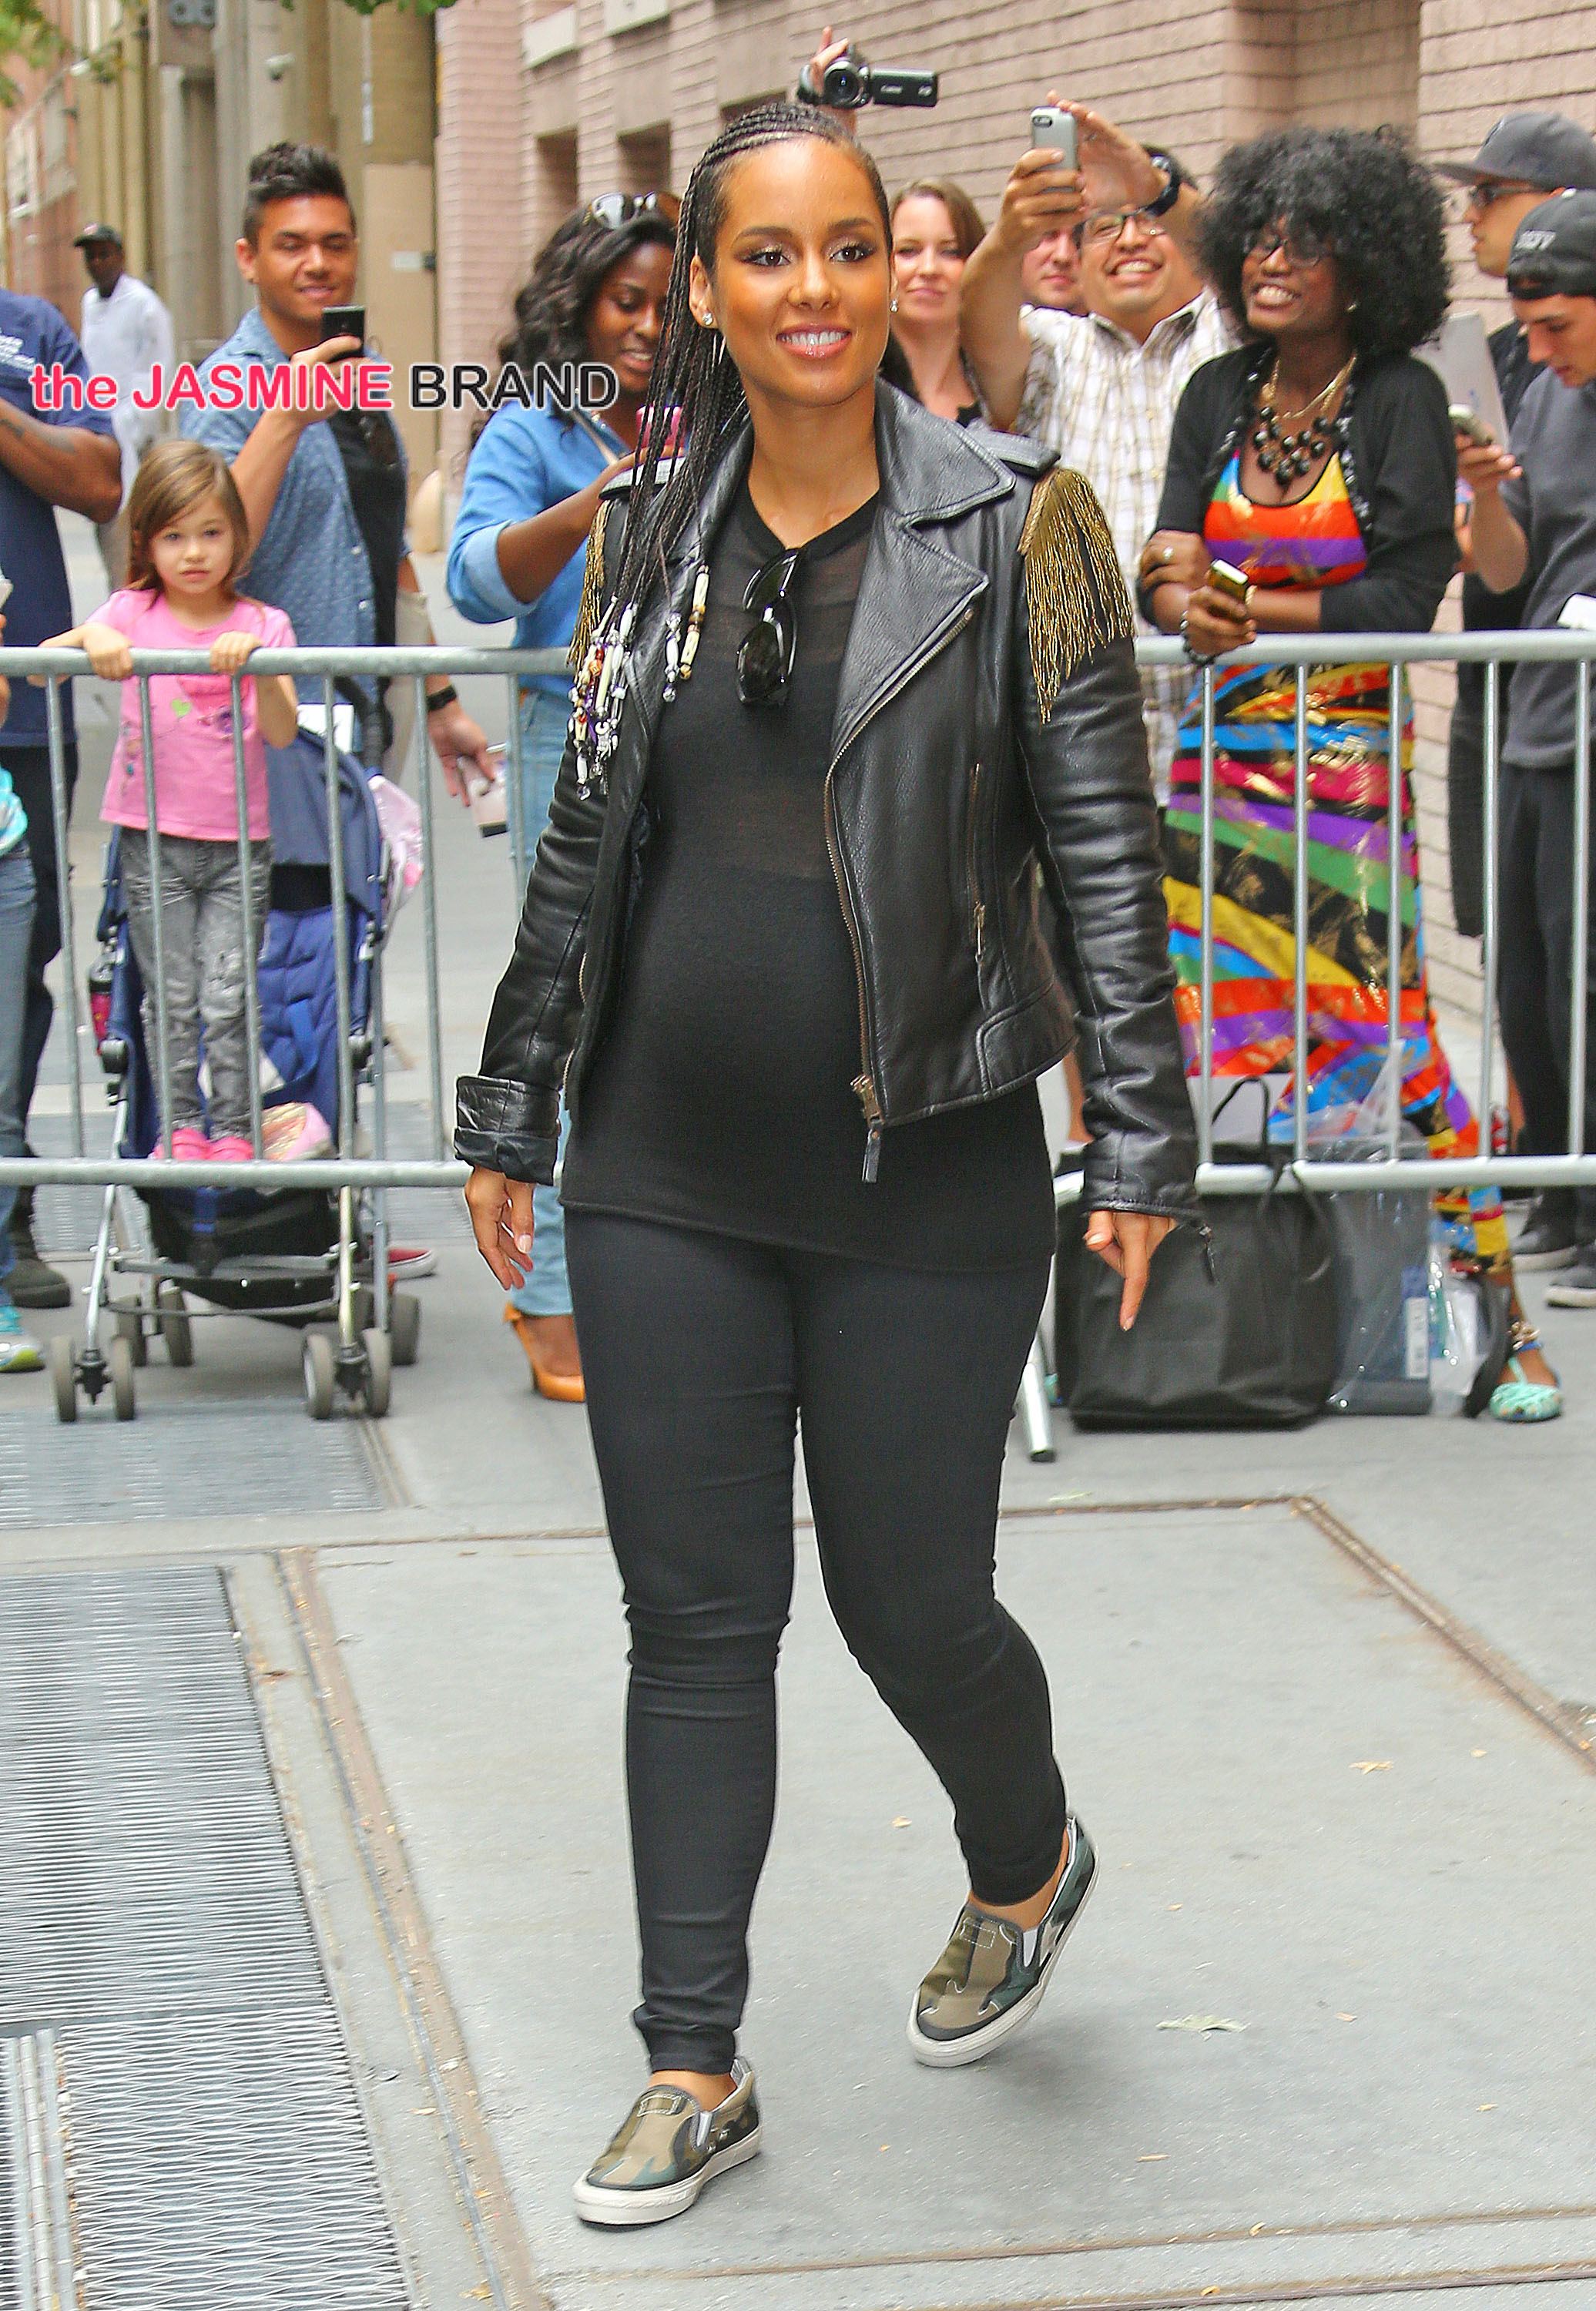 Alicia Keys looks very pregnant when departing ABC studios in NYC